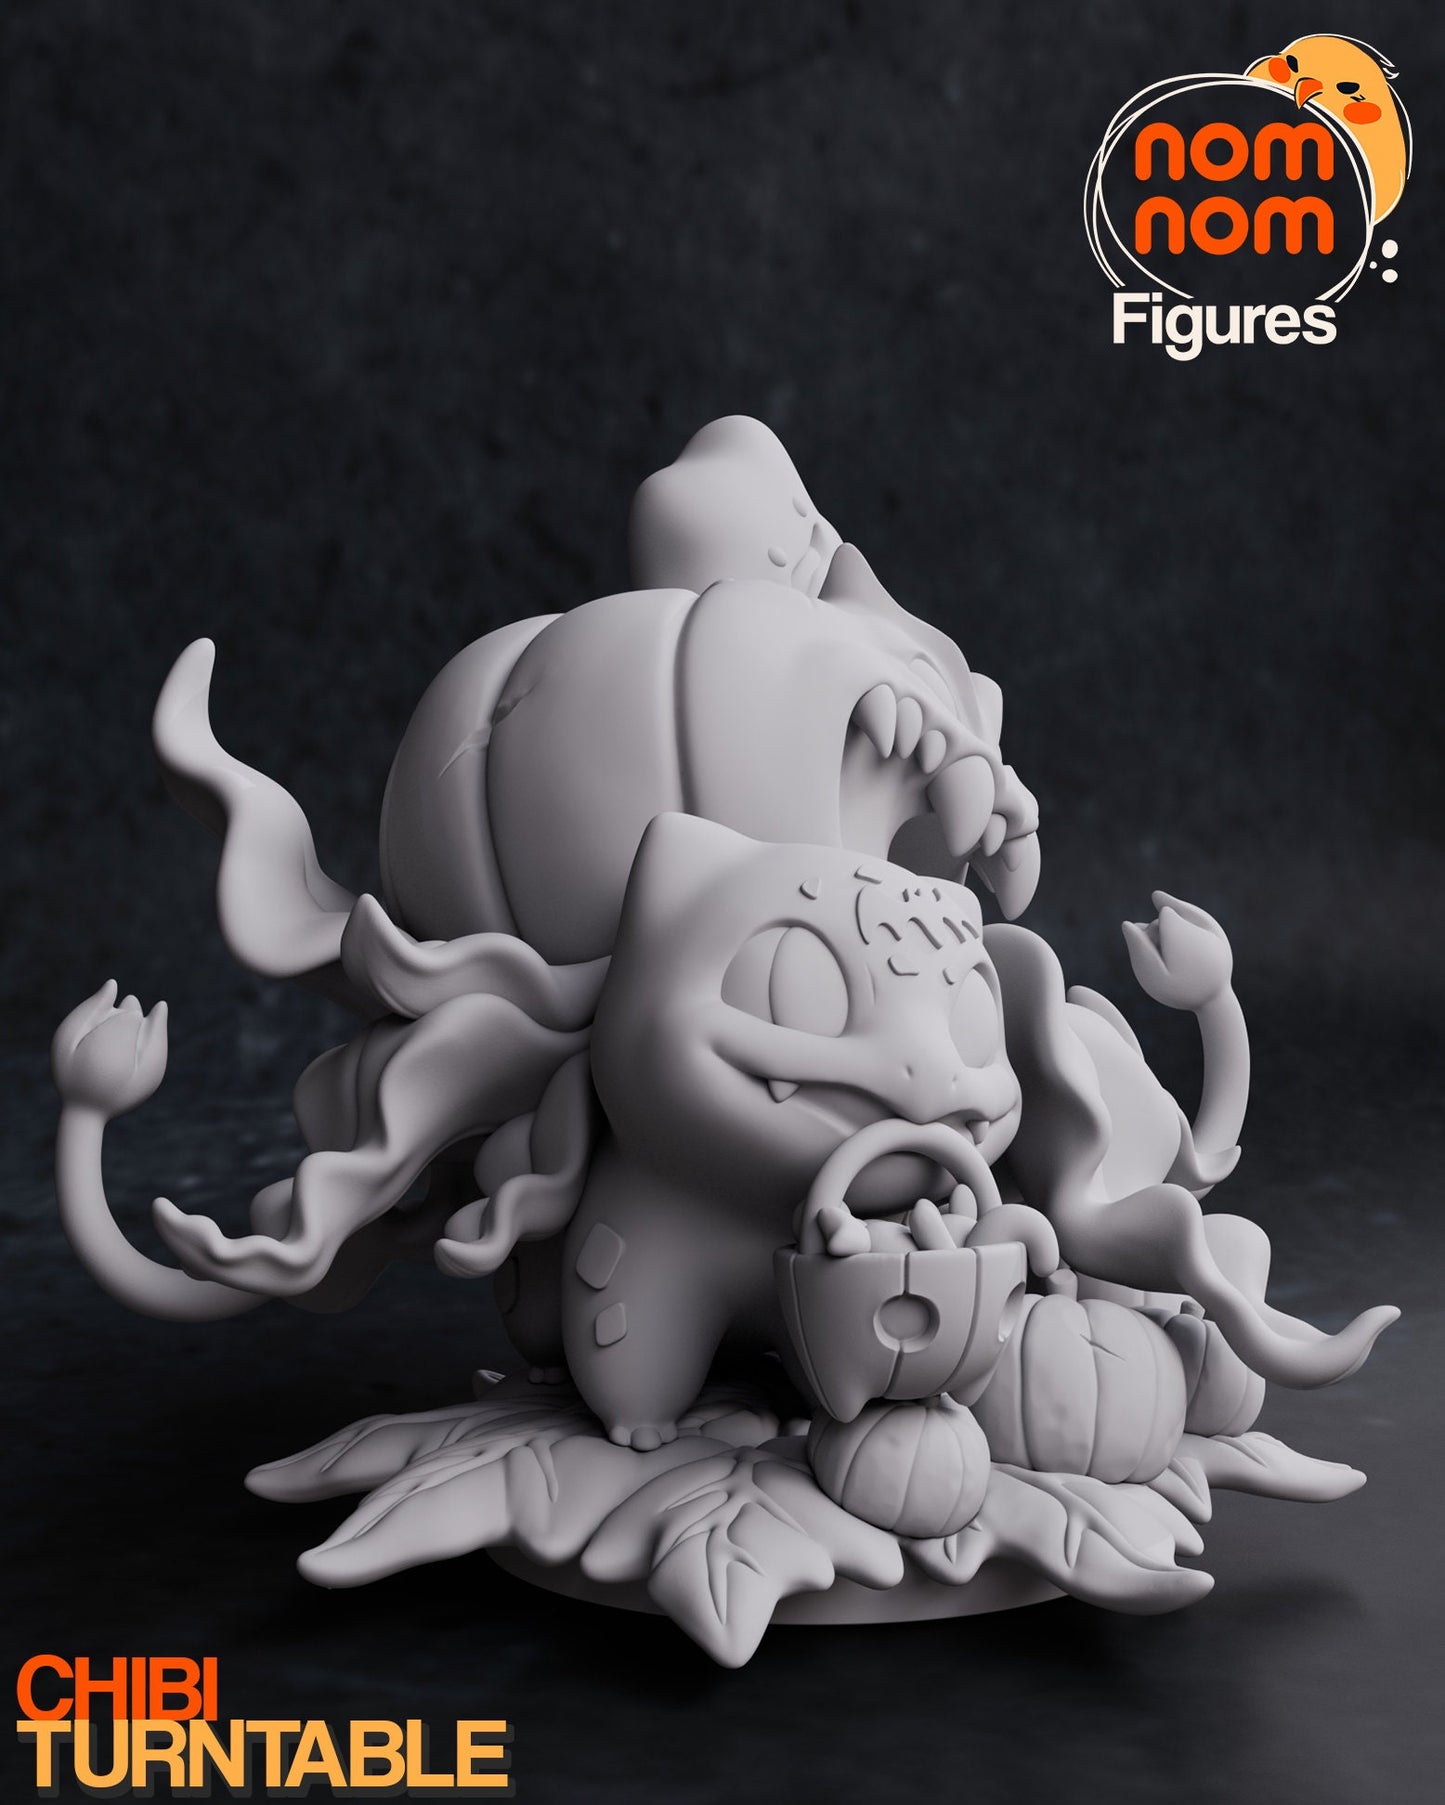 Chibi Halloween Seed Monster by NomNom Figures